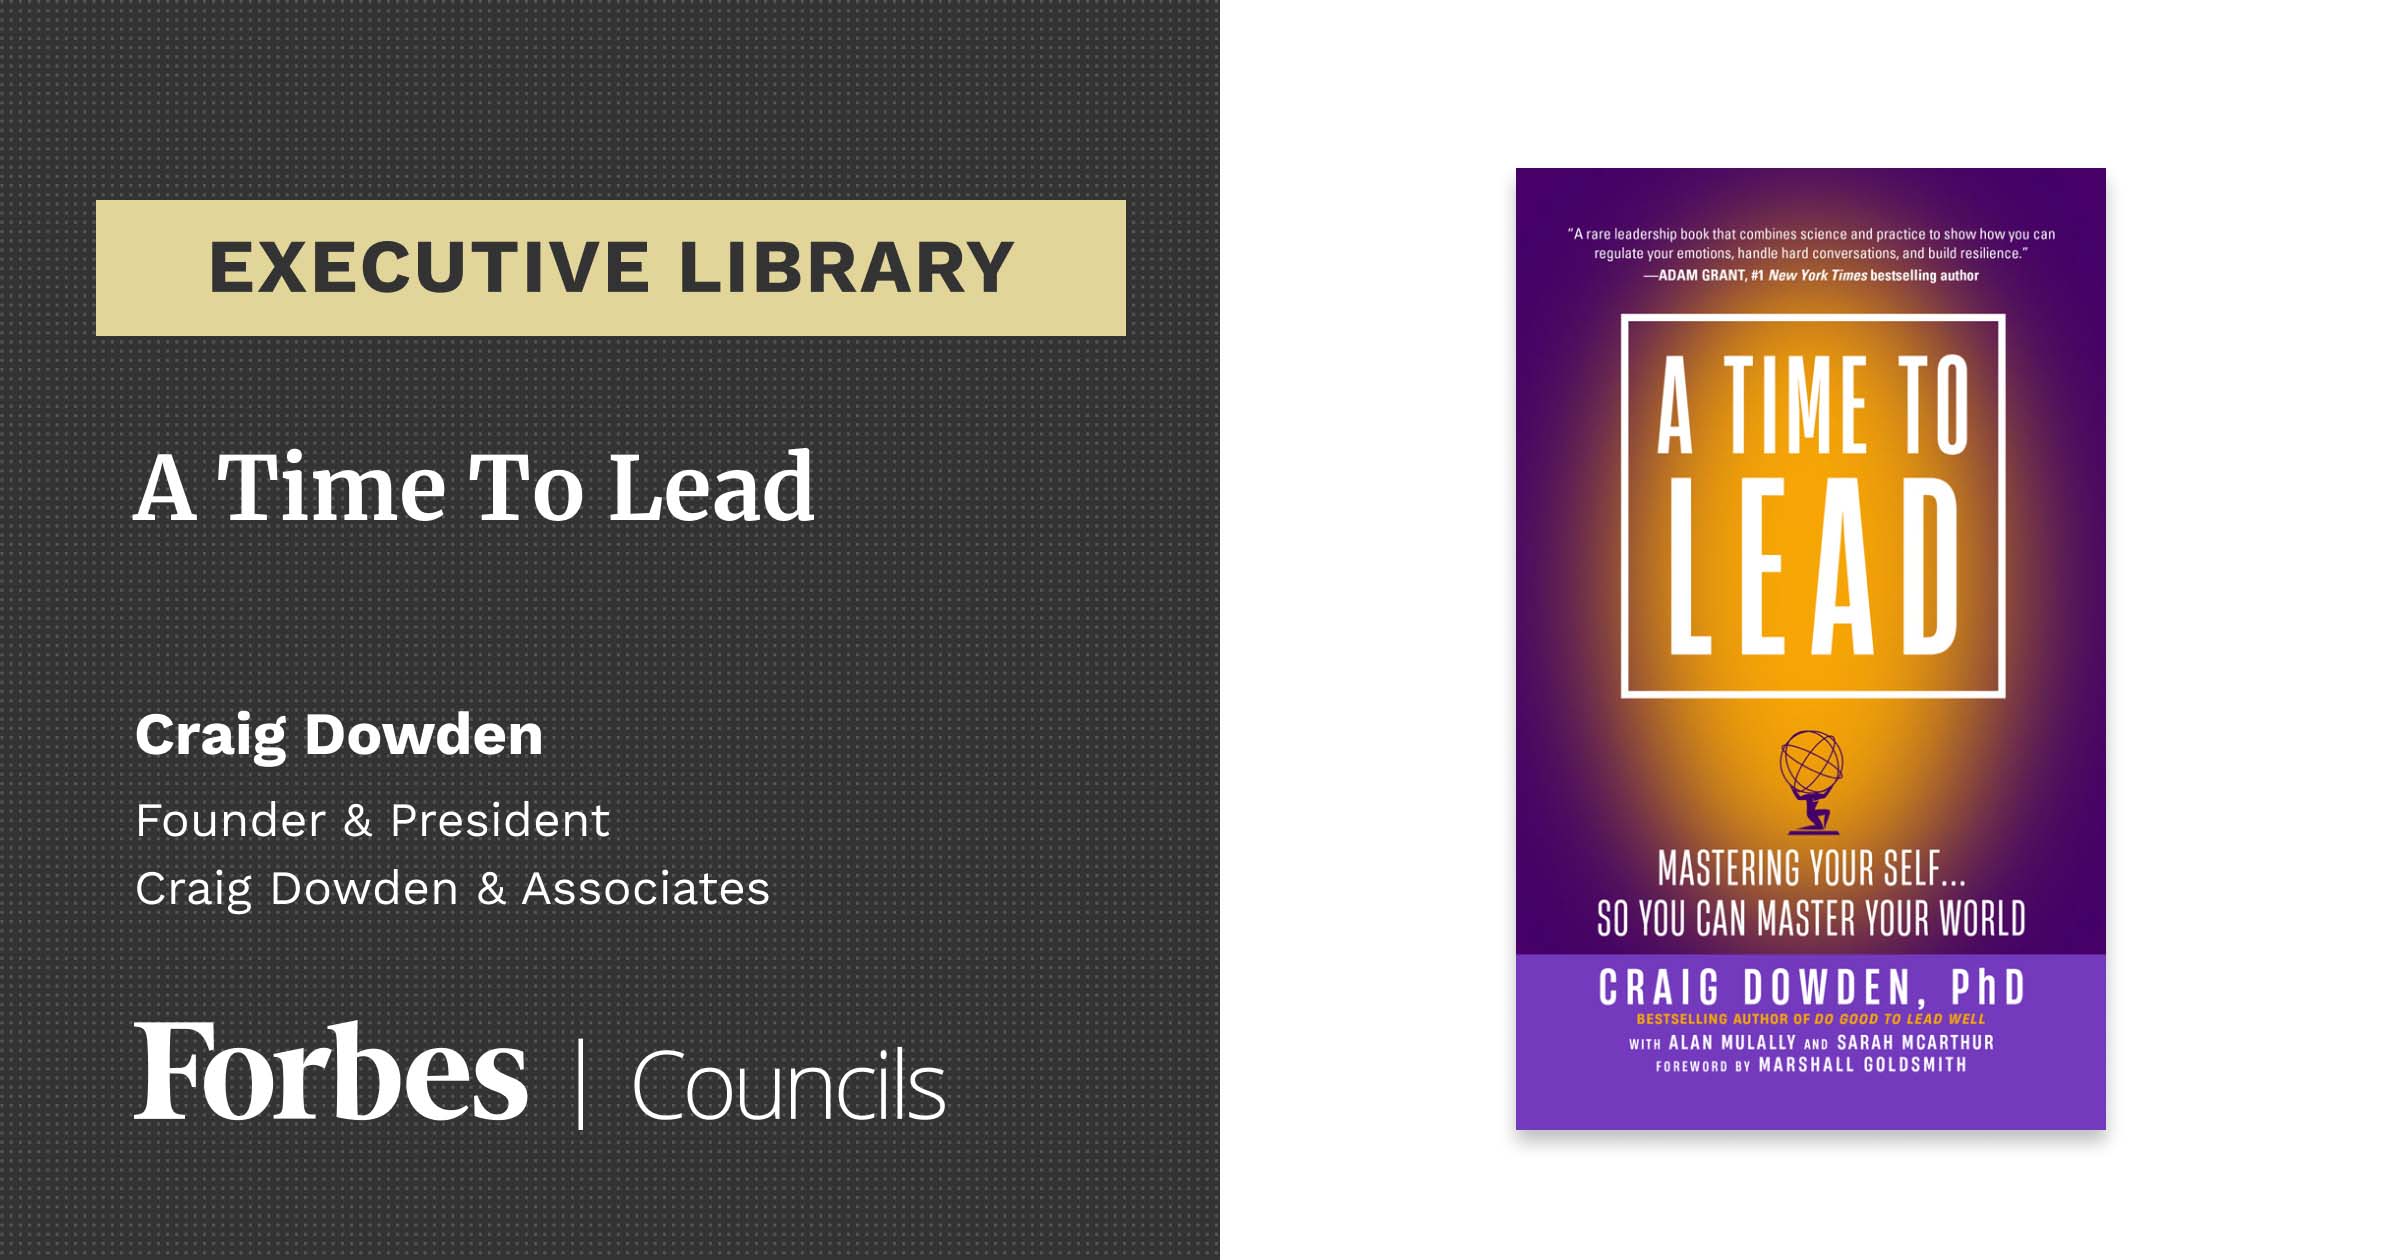 A Time To Lead by Craig Dowden